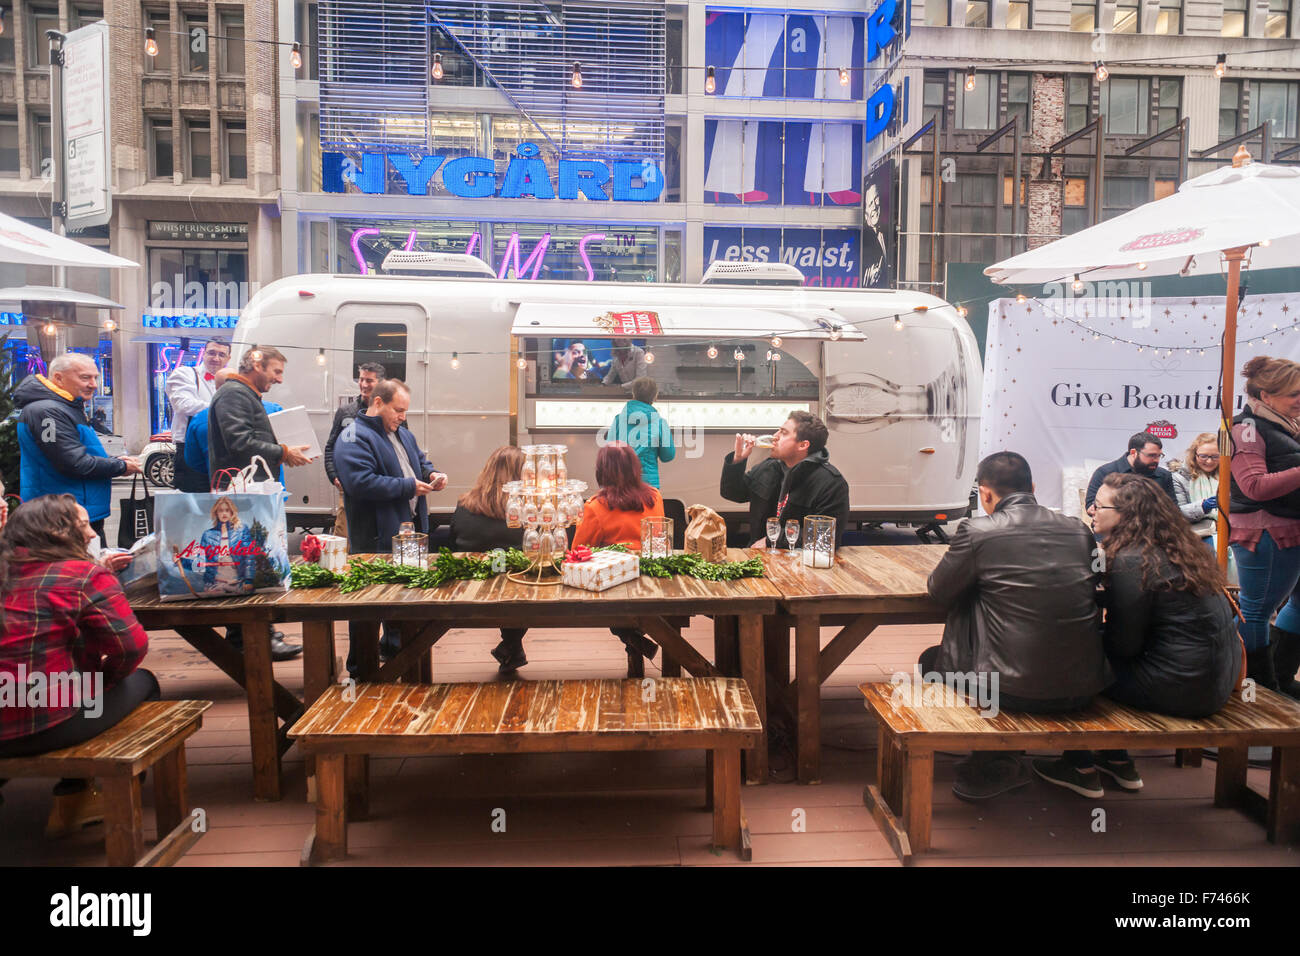 Stella Artois gives away free beer to those over 21 at their trailer in the Garment District Holiday Market on Sunday, November 22, 2015. The popular temporary food fair run by UrbanSpace, on Broadway in the Garment District, brings an assortment of restaurants providing an outdoor dining experience attracting hungry office workers, shoppers and tourists. (© Richard B. Levine) Stock Photo